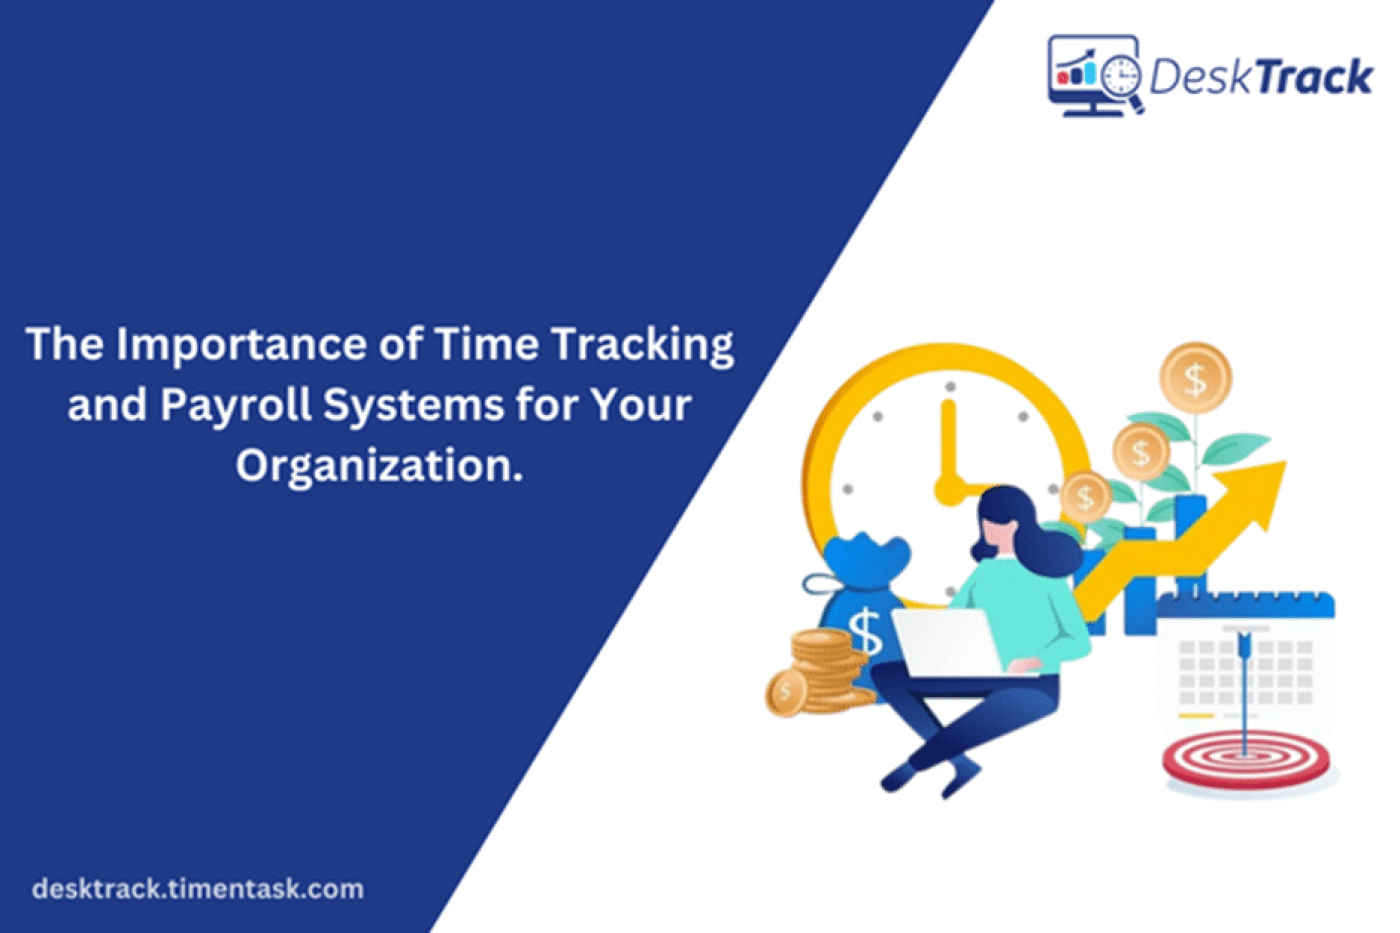 Boosting Organizational Efficiency with Time Tracking and Payroll Systems